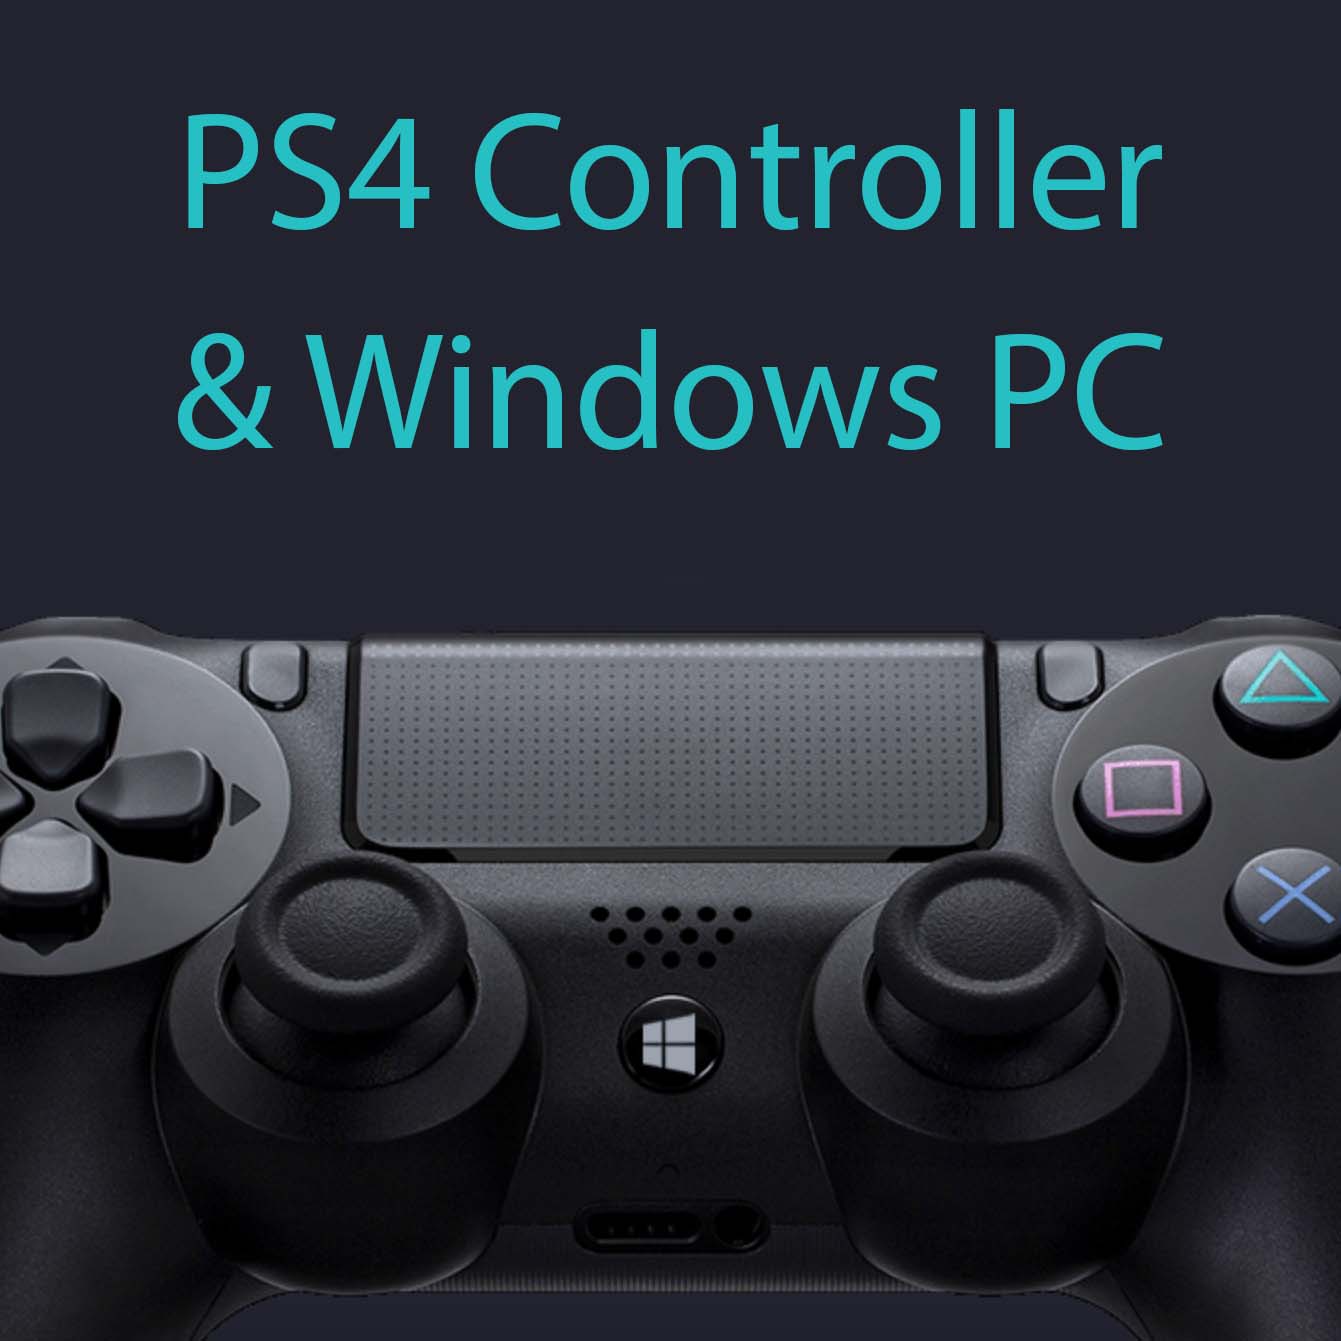 Connect PS4 controller PC 2 ways and tip